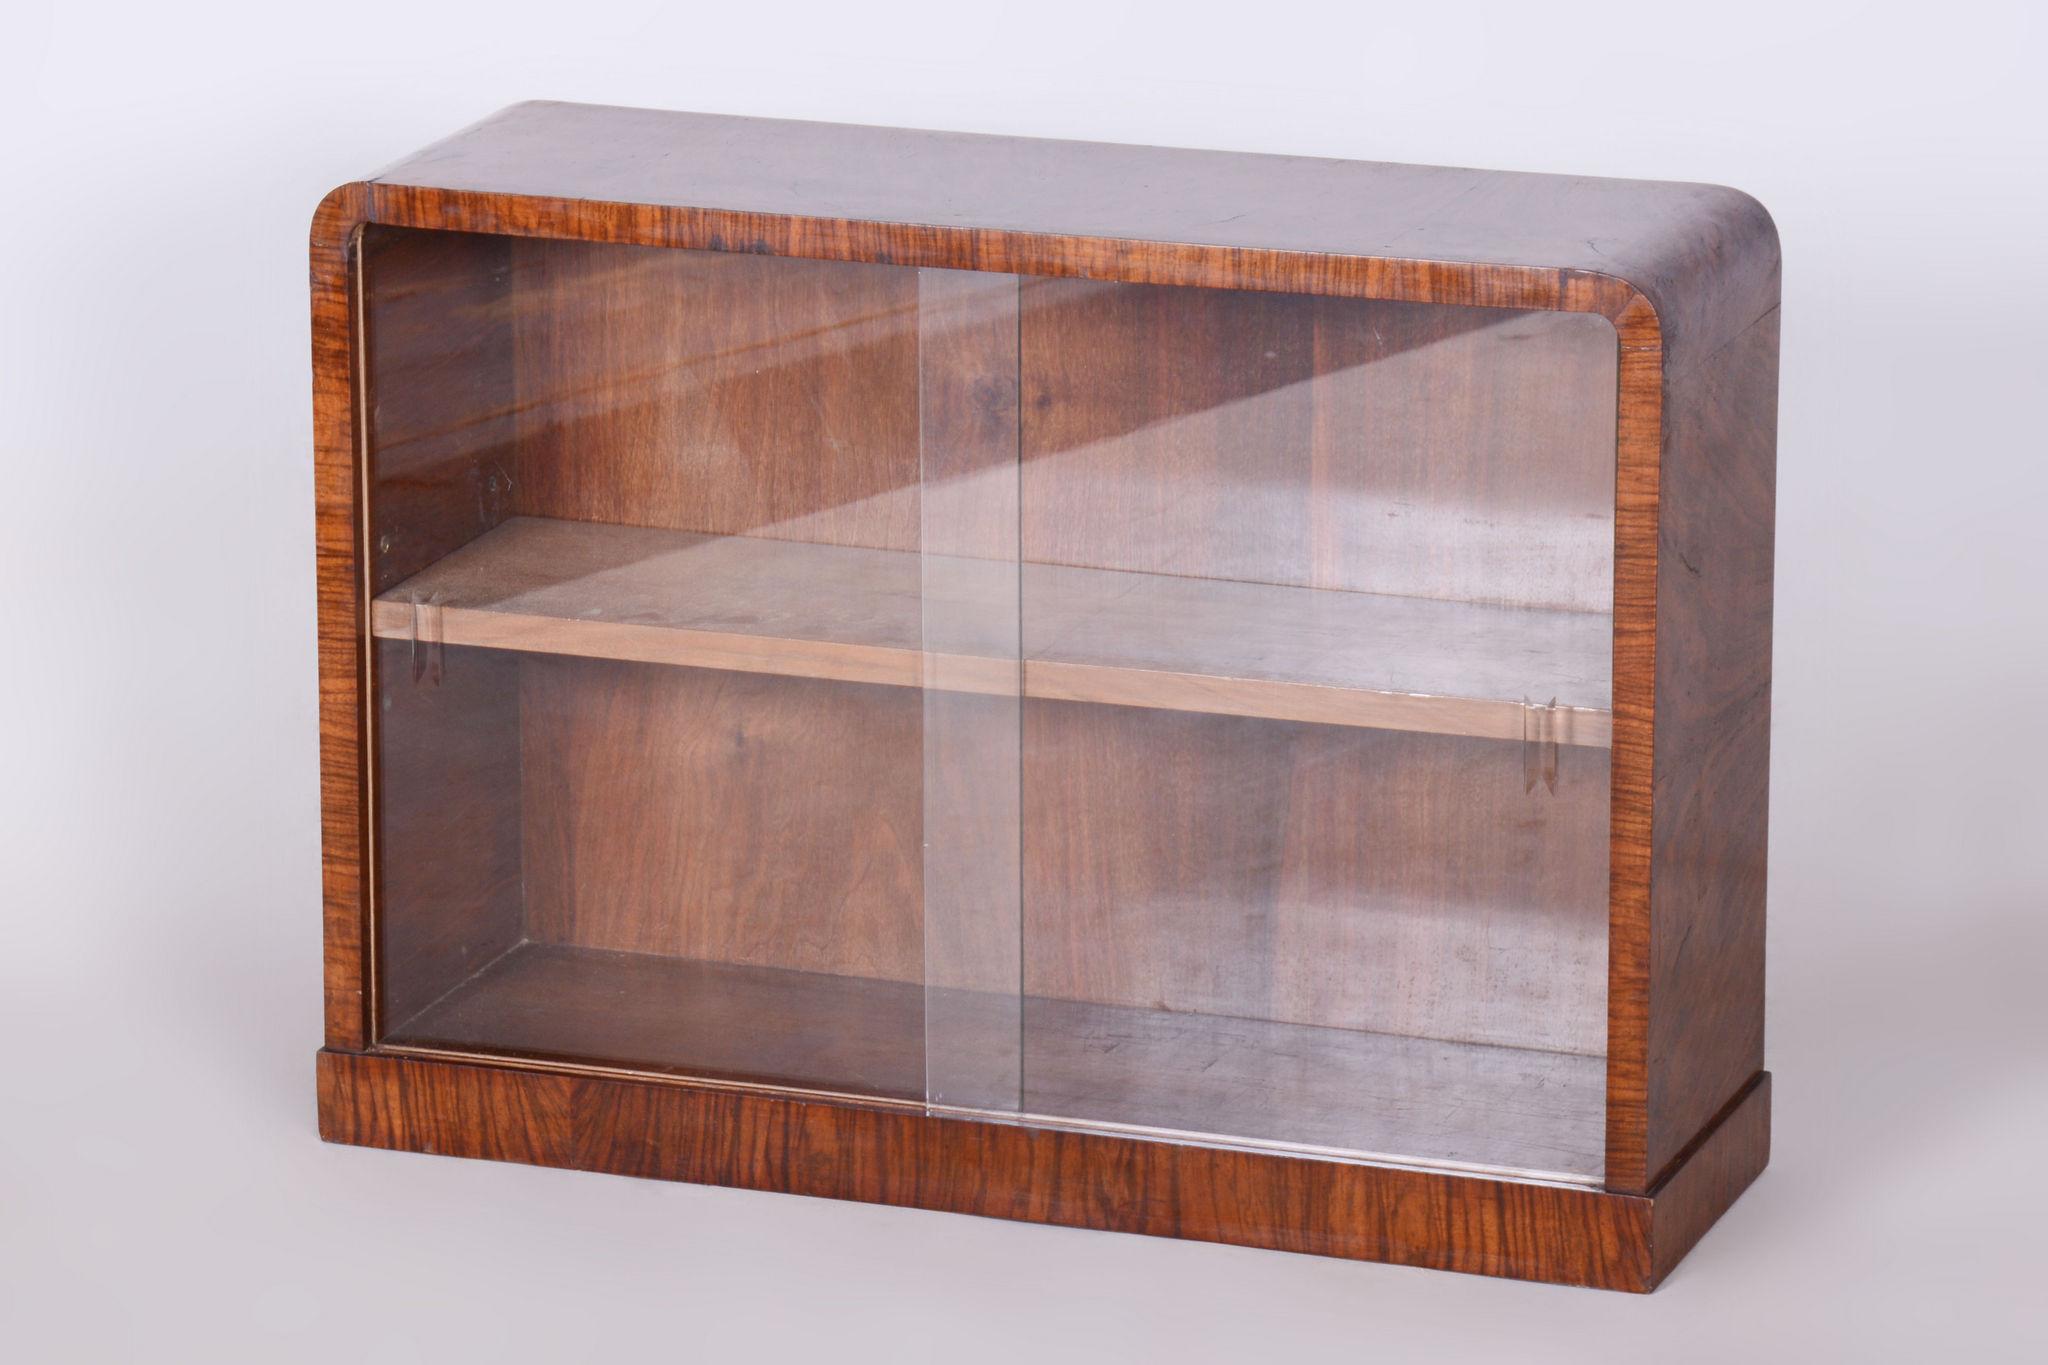 20th century Art Deco display bookcase

Origin: Czech
Material: Walnut and glass

This item features classic Art Deco elements. Art Deco is a style that originated in France in the early 20th century. Its furniture designs are meticulously crafted,